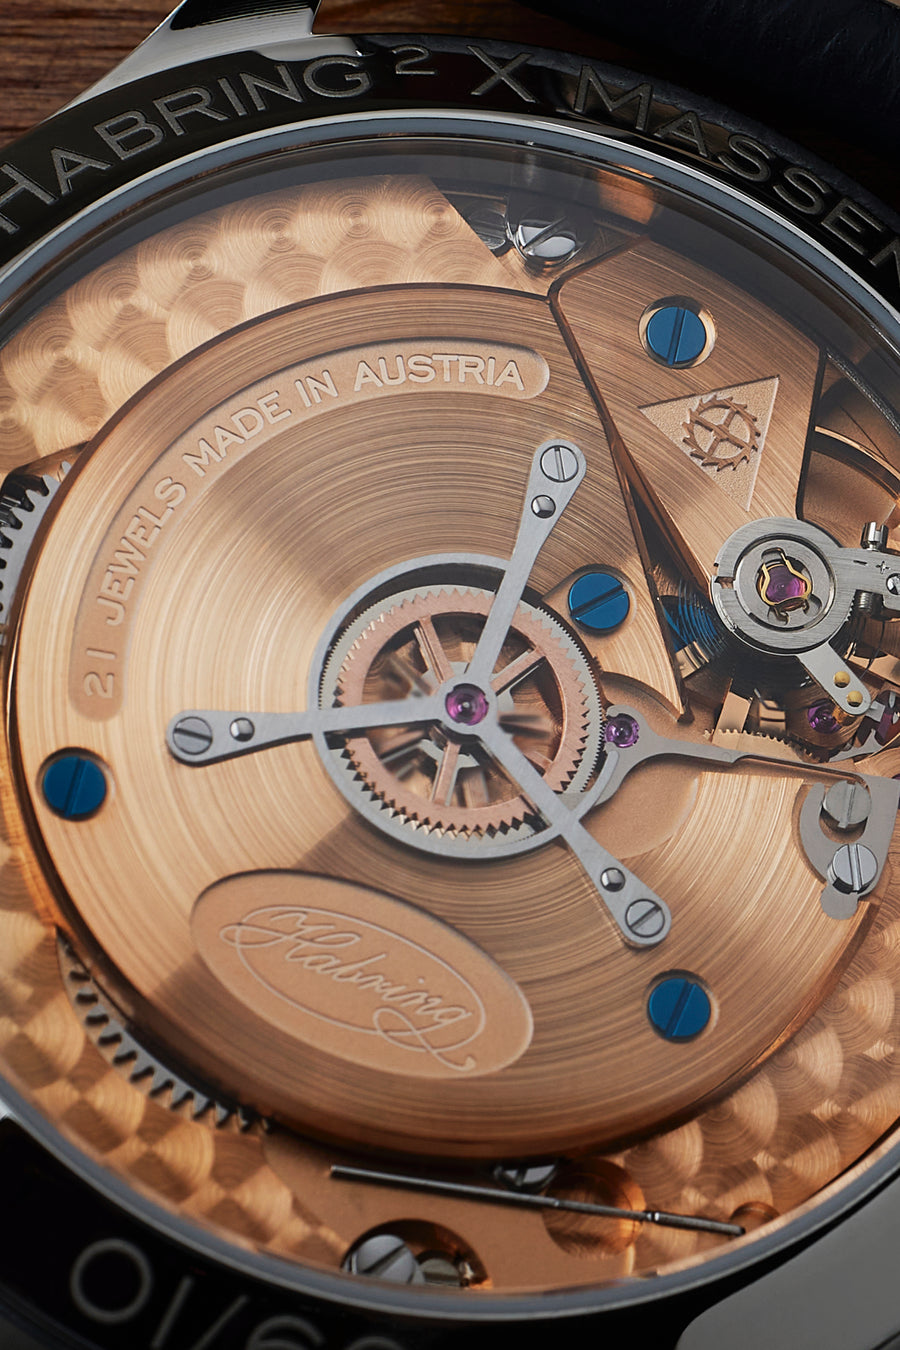 The Massena LAB x Habring² ERWIN LAB03 is powered by the  Habring²  caliber A11MS hand-wound movement.